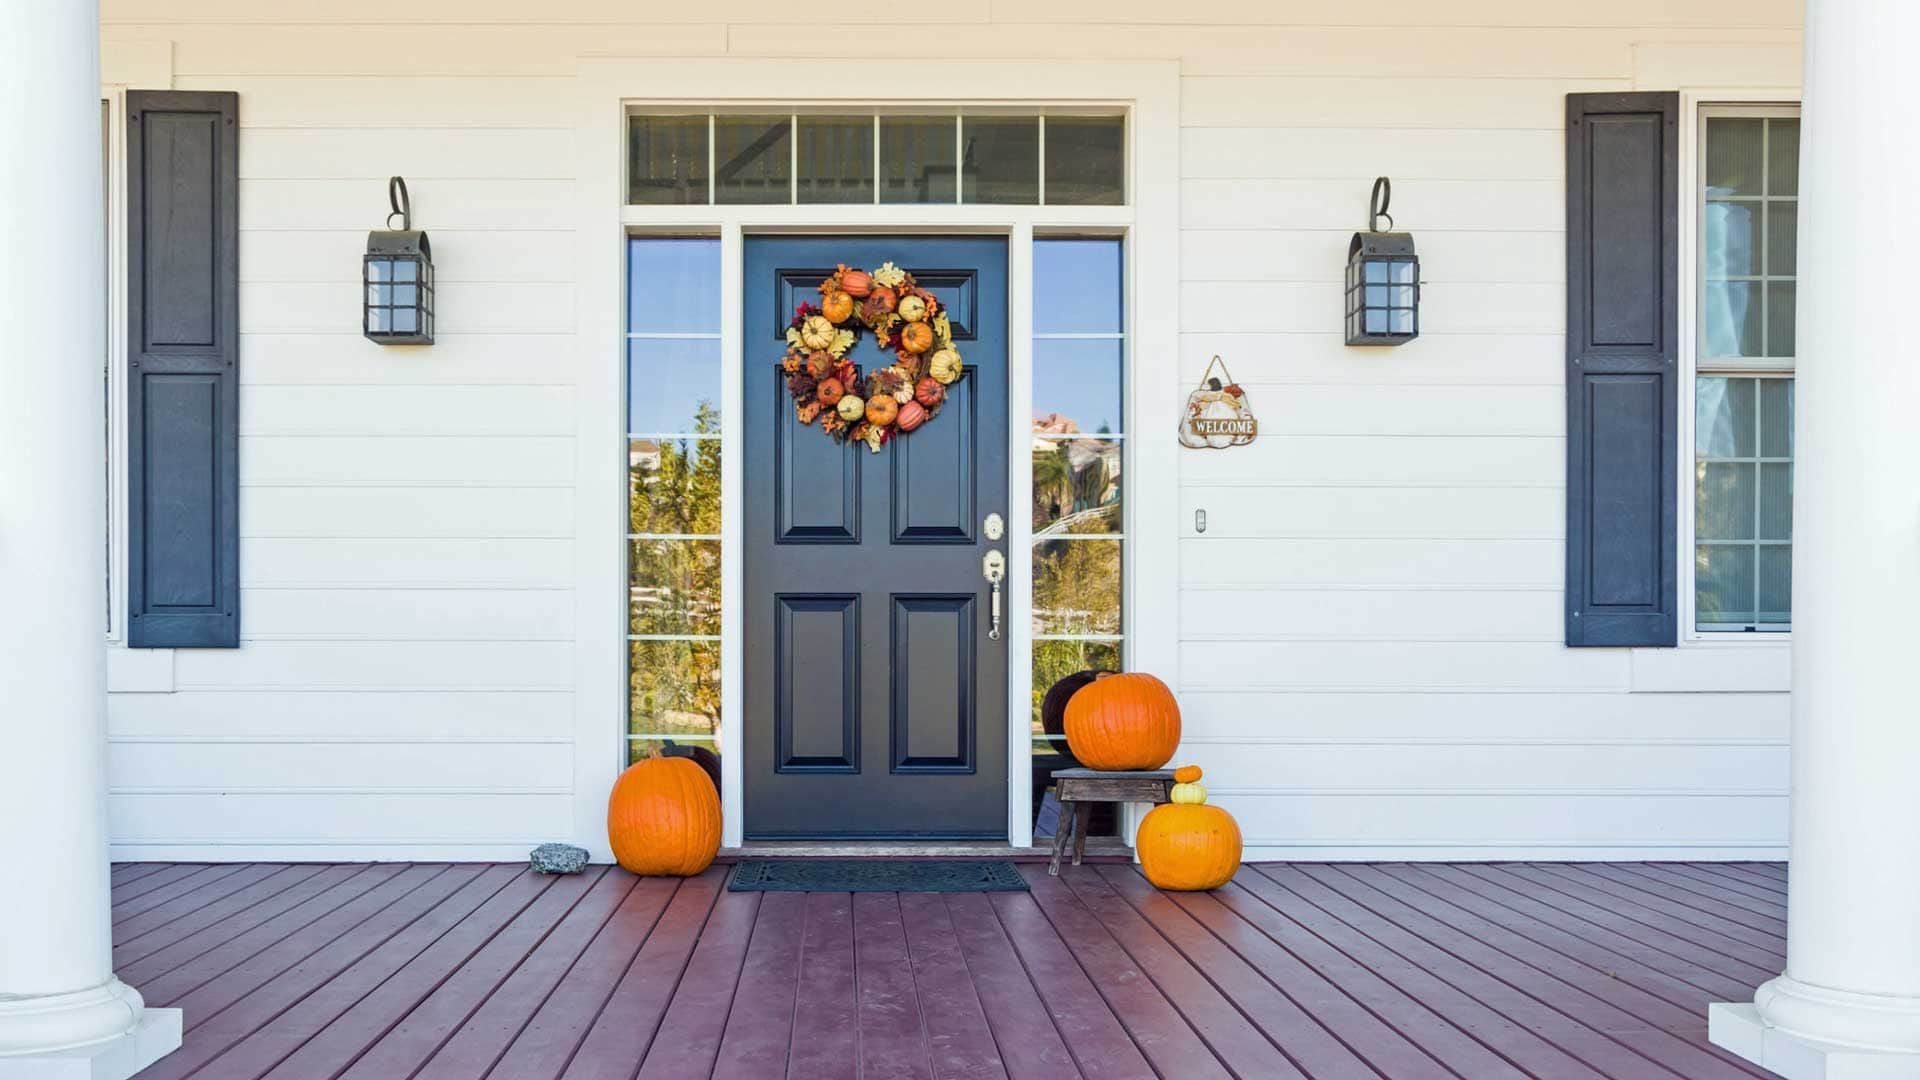 Photo of a home front porch in the fall